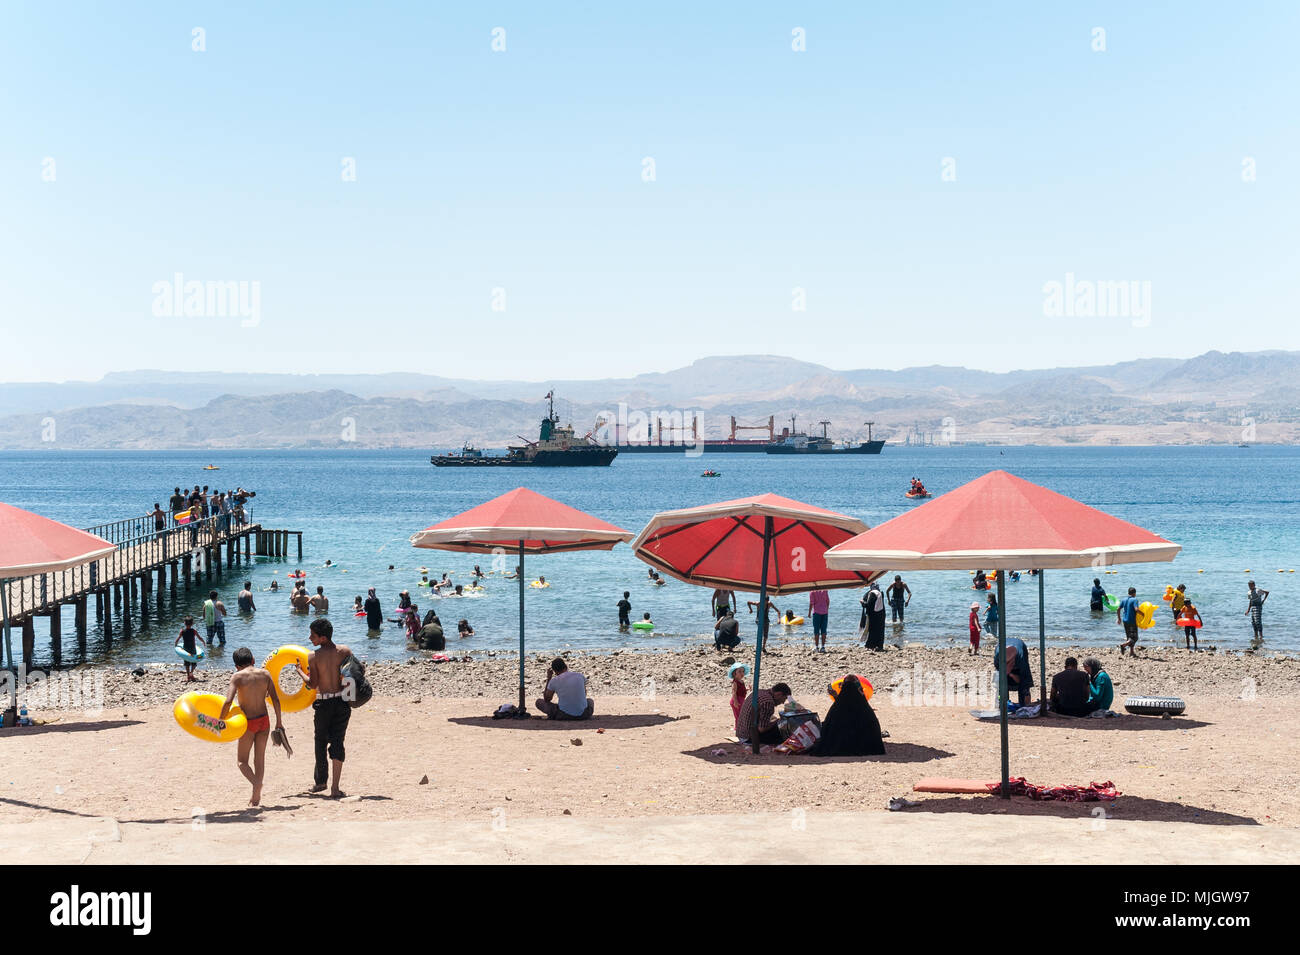 Aqaba,al-ʻAqabah , "the Obstacle"is a Jordanian coastal city situated at  the northeastern tip of the Red Sea. Aqaba is the largest city on the Gulf  of Stock Photo - Alamy